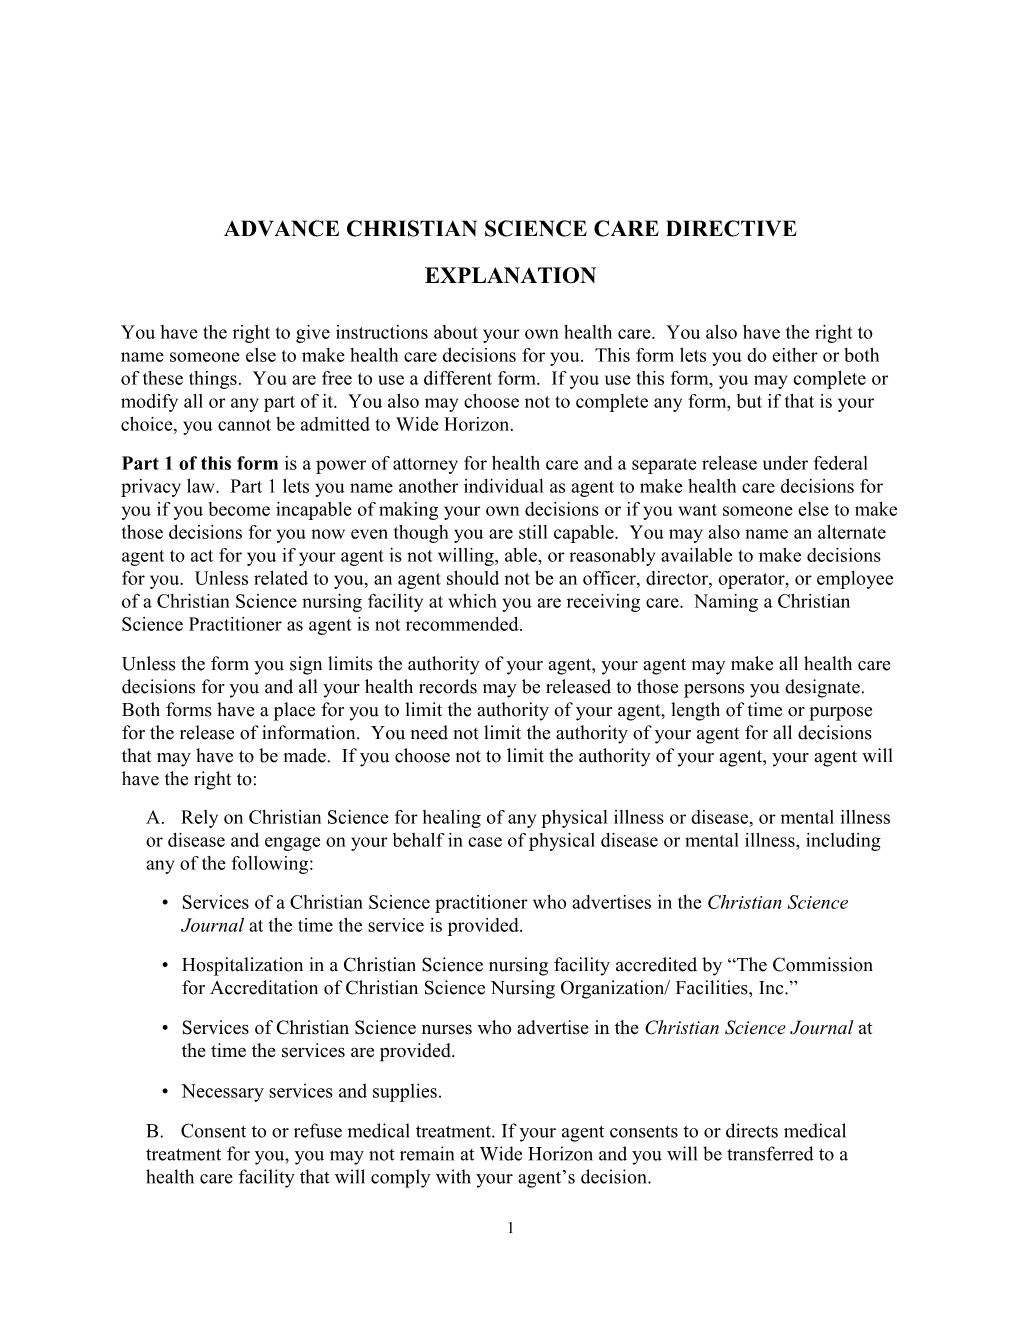 Advance Christian Science Care Directive